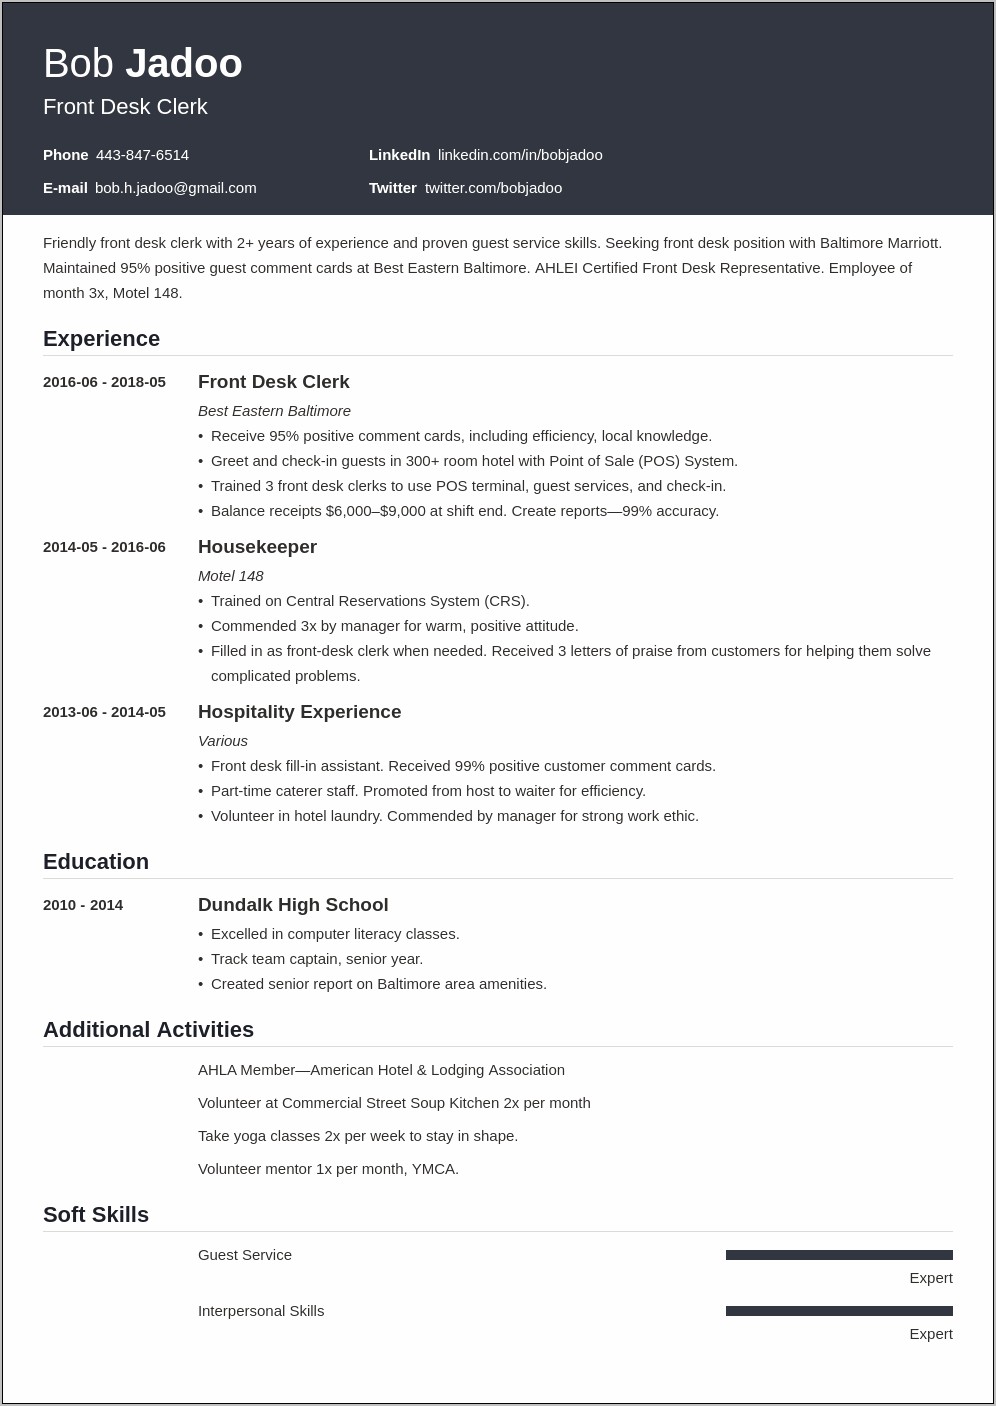 Resume For Hotel Job With No Experience Pdf